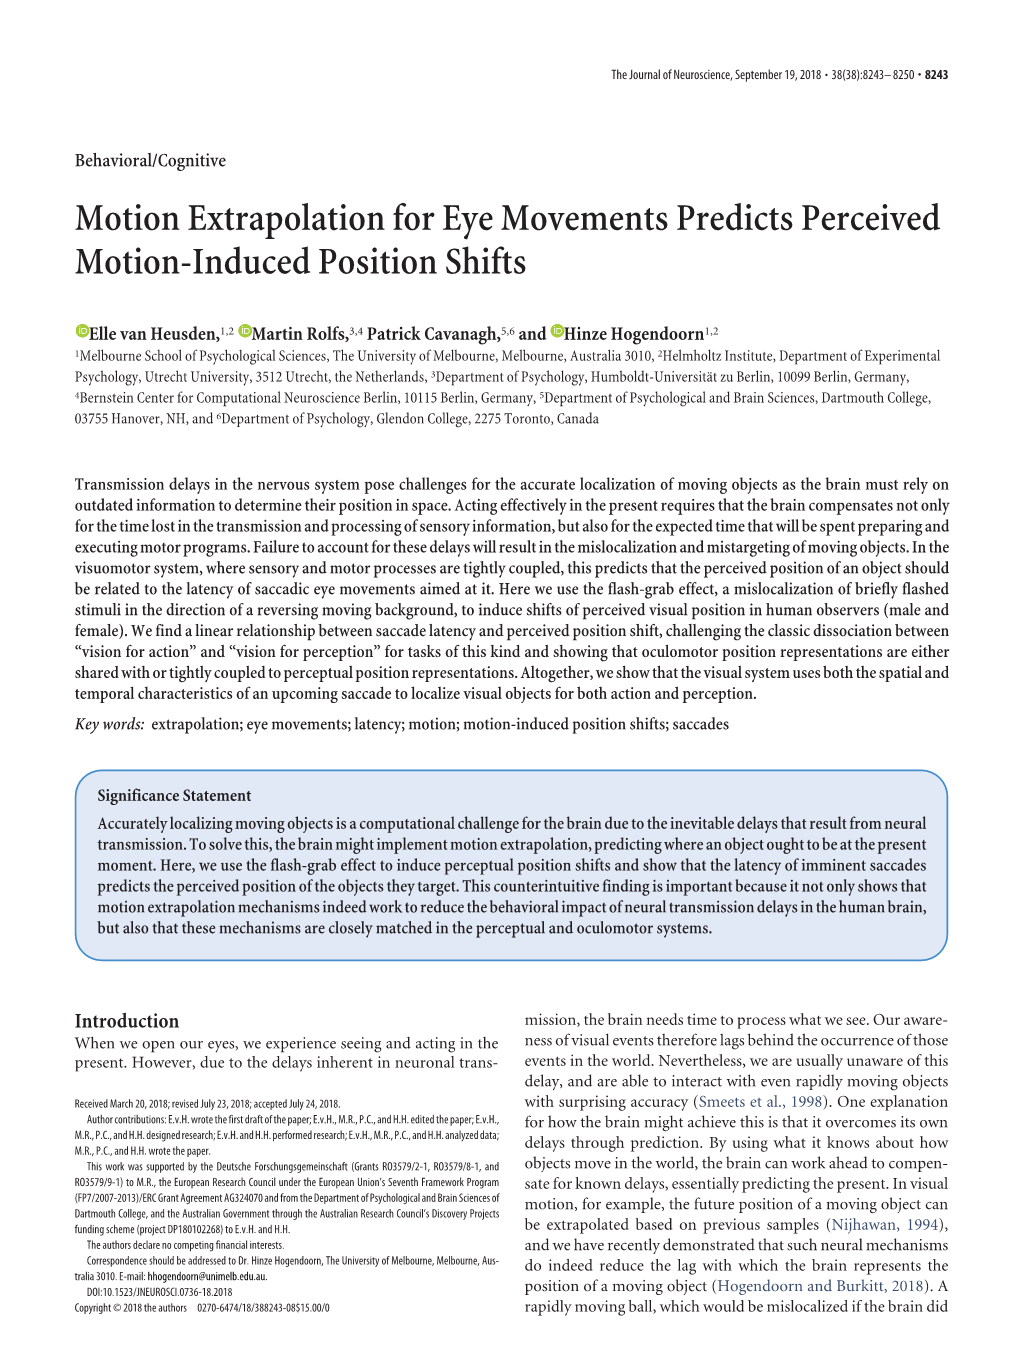 Motion Extrapolation for Eye Movements Predicts Perceived Motion-Induced Position Shifts